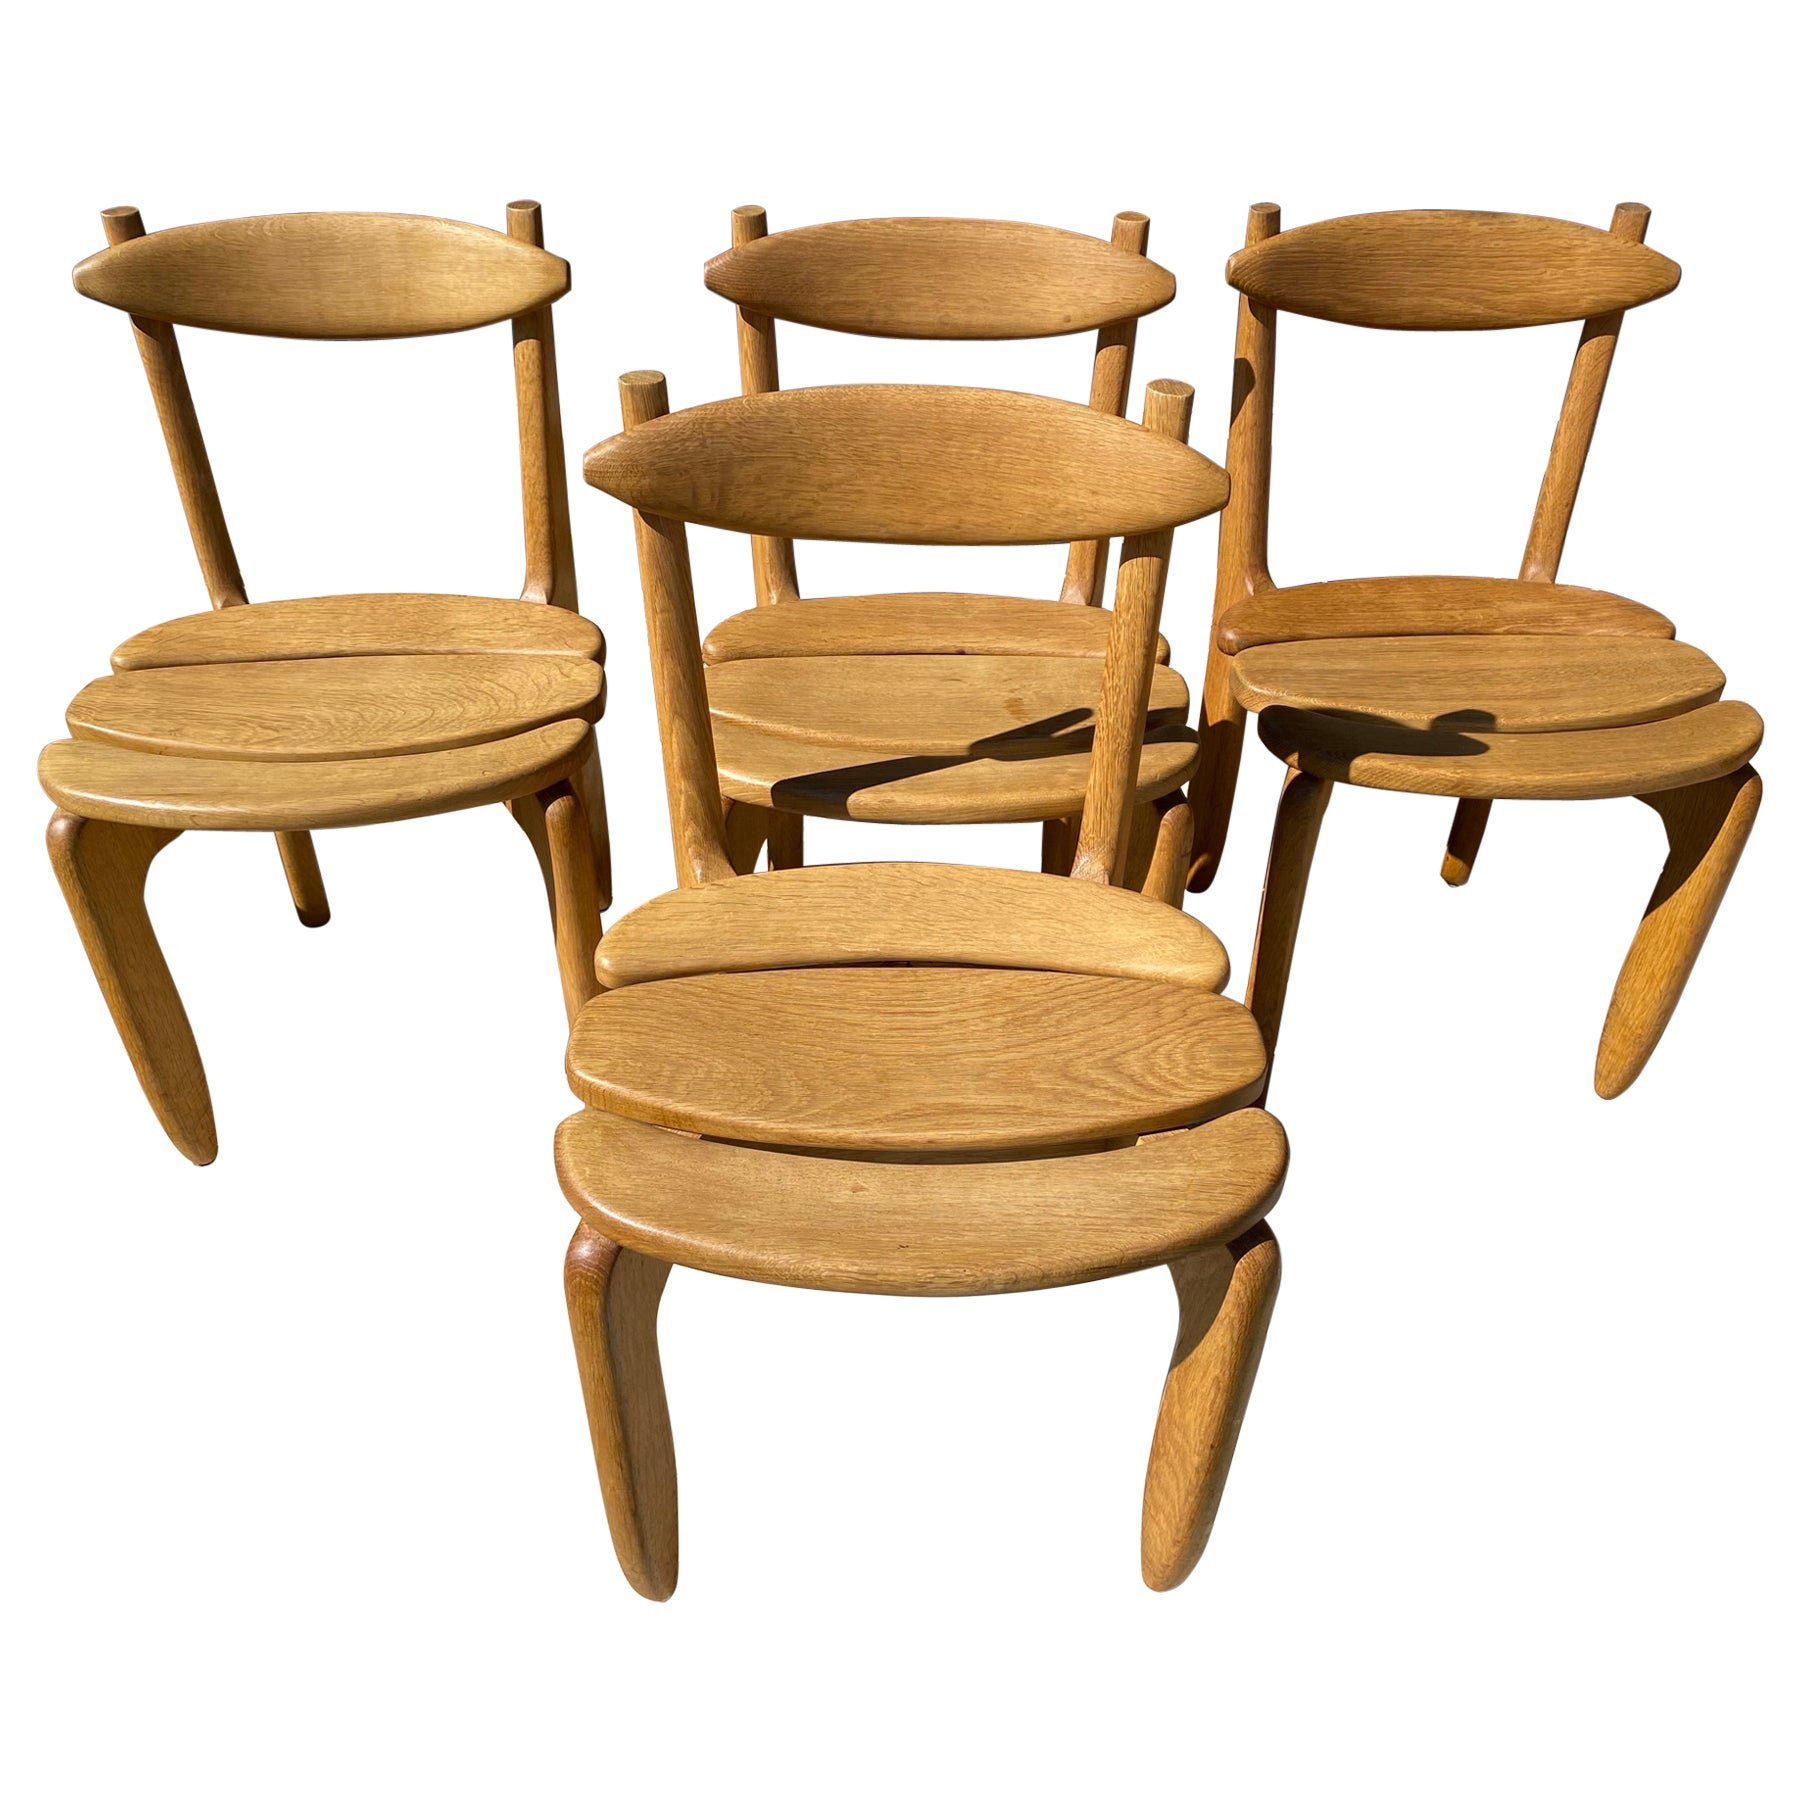 Set of 4 Guillerme et Chambron 'Thierry' Dining Chairs Made of Solid Oak